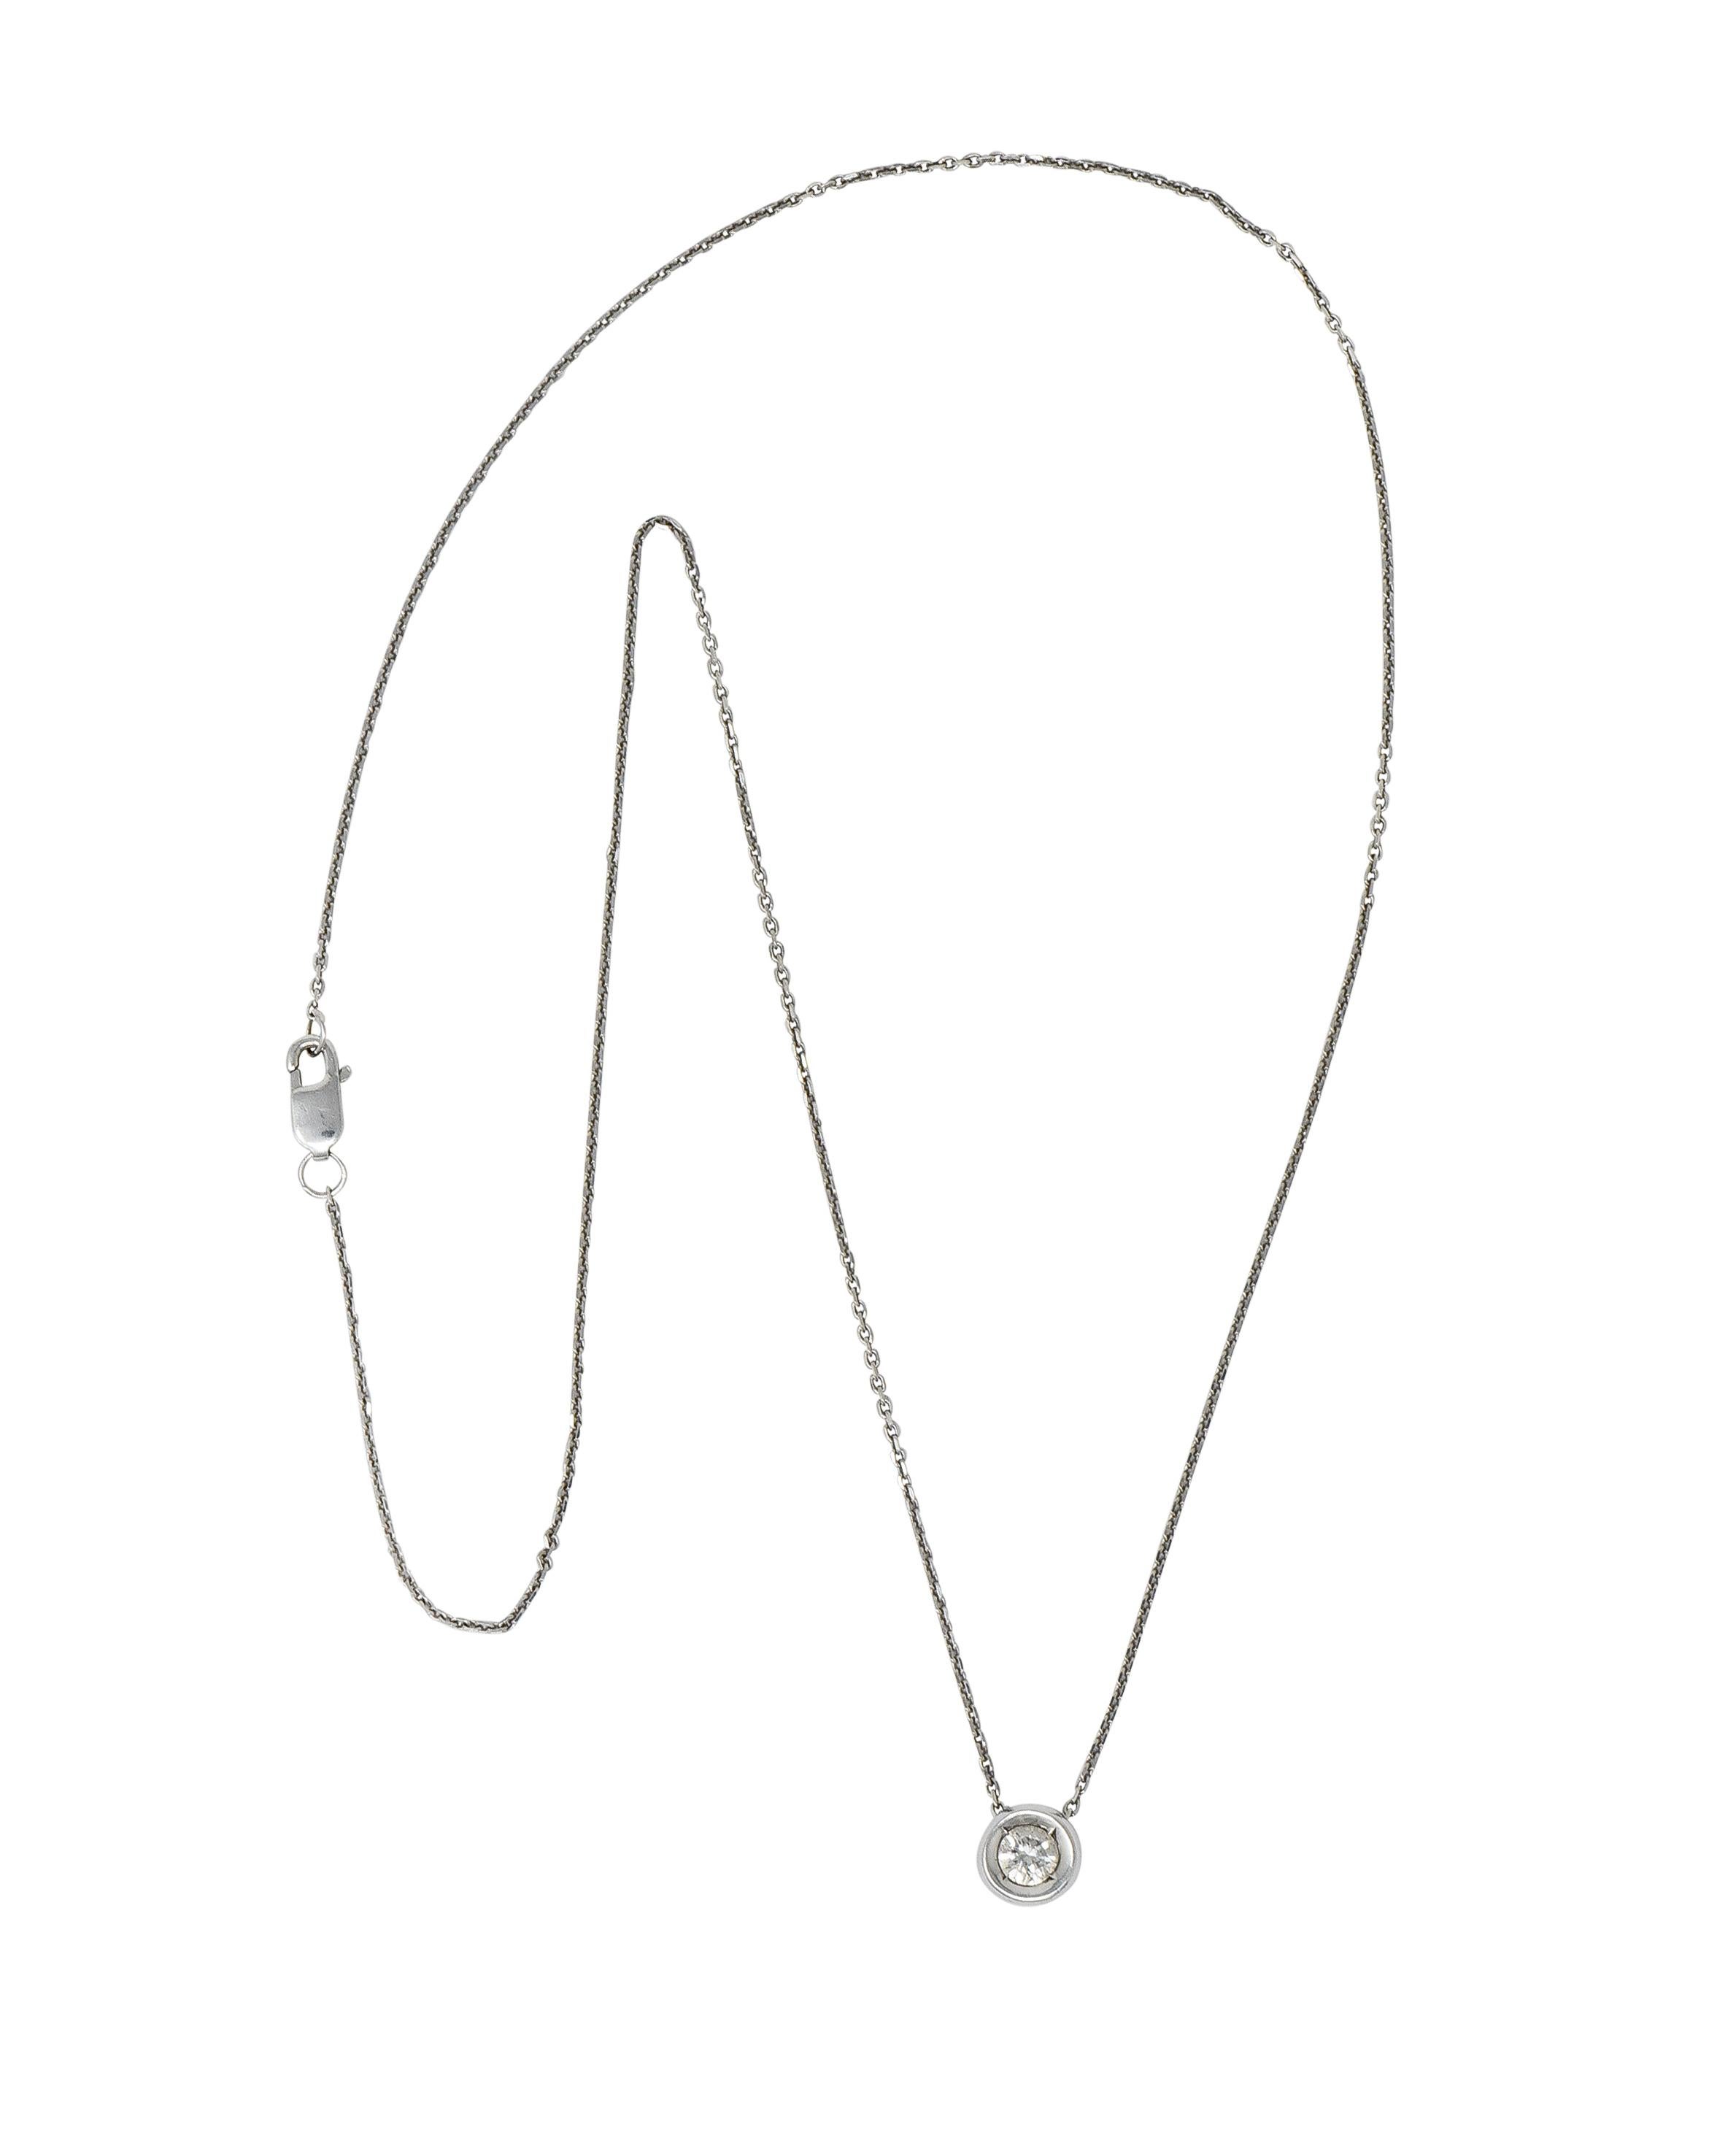 Centering a round brilliant cut diamond weighing approximately 0.25 carat, I/J color with SI clarity

Bead set in a puffed and polished gold surround

Threaded on a white gold cable chain necklace completed by a lobster clasp

With maker's mark and